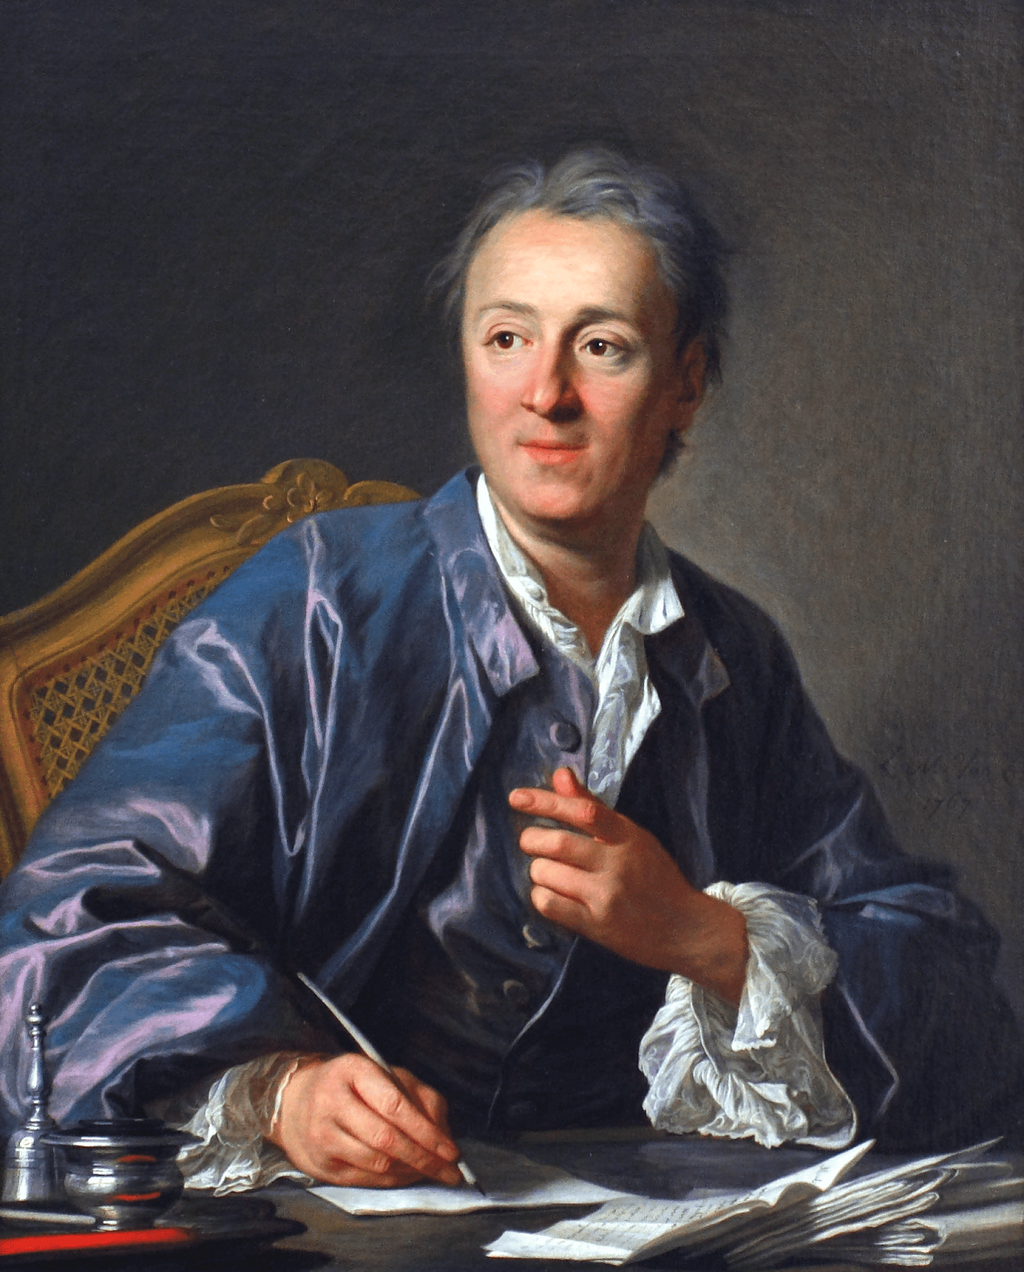 The Greatest Philosophical Thinker of the 1700s: Denis Diderot